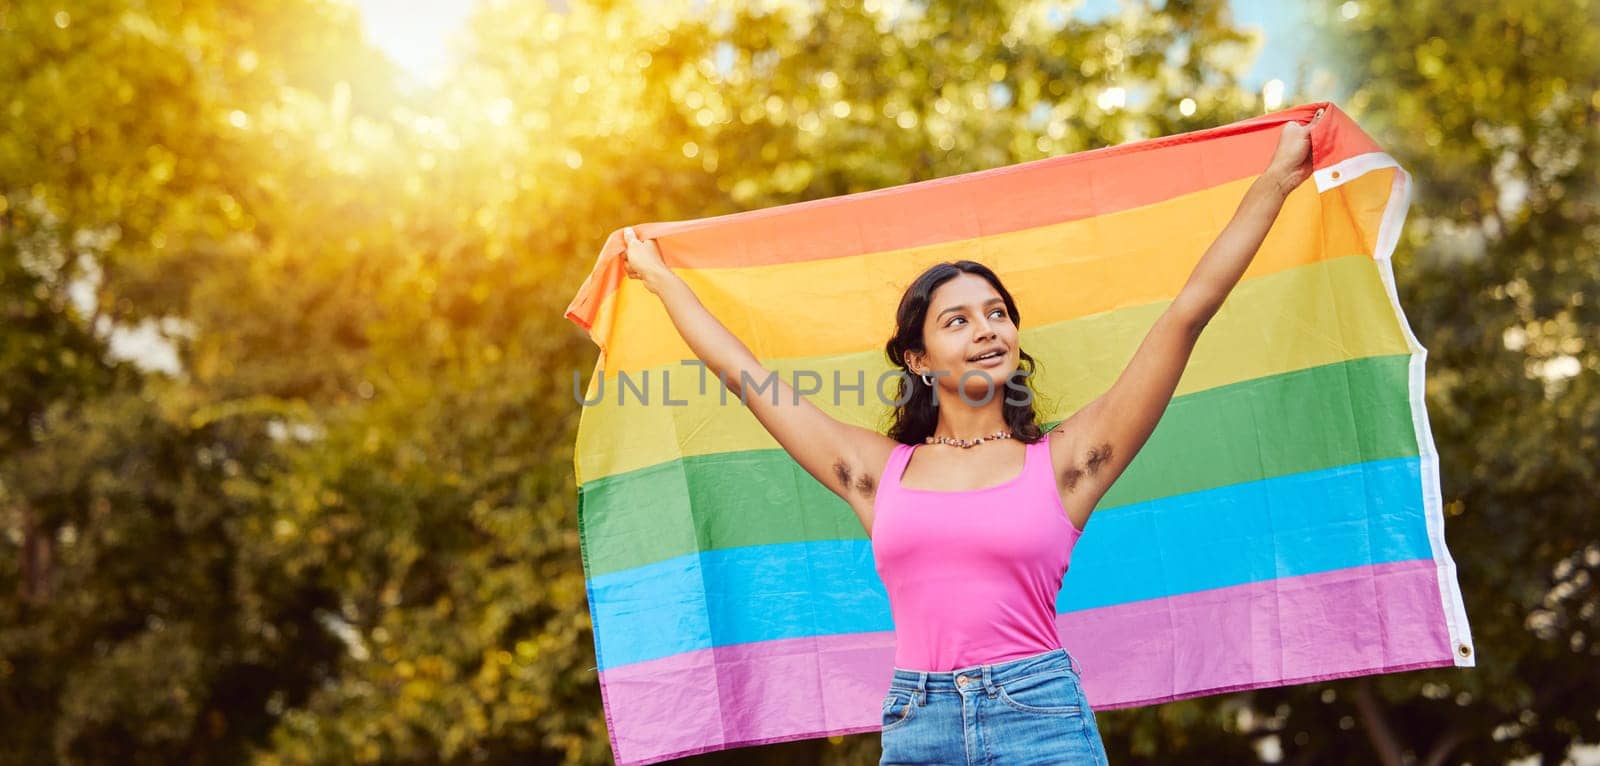 Love, nature and woman with pride flag, smile happy non binary lifestyle of freedom, peace and equality in Brazil. Trees, sun and summer fun for happy woman in lgbt community with flag for gay pride